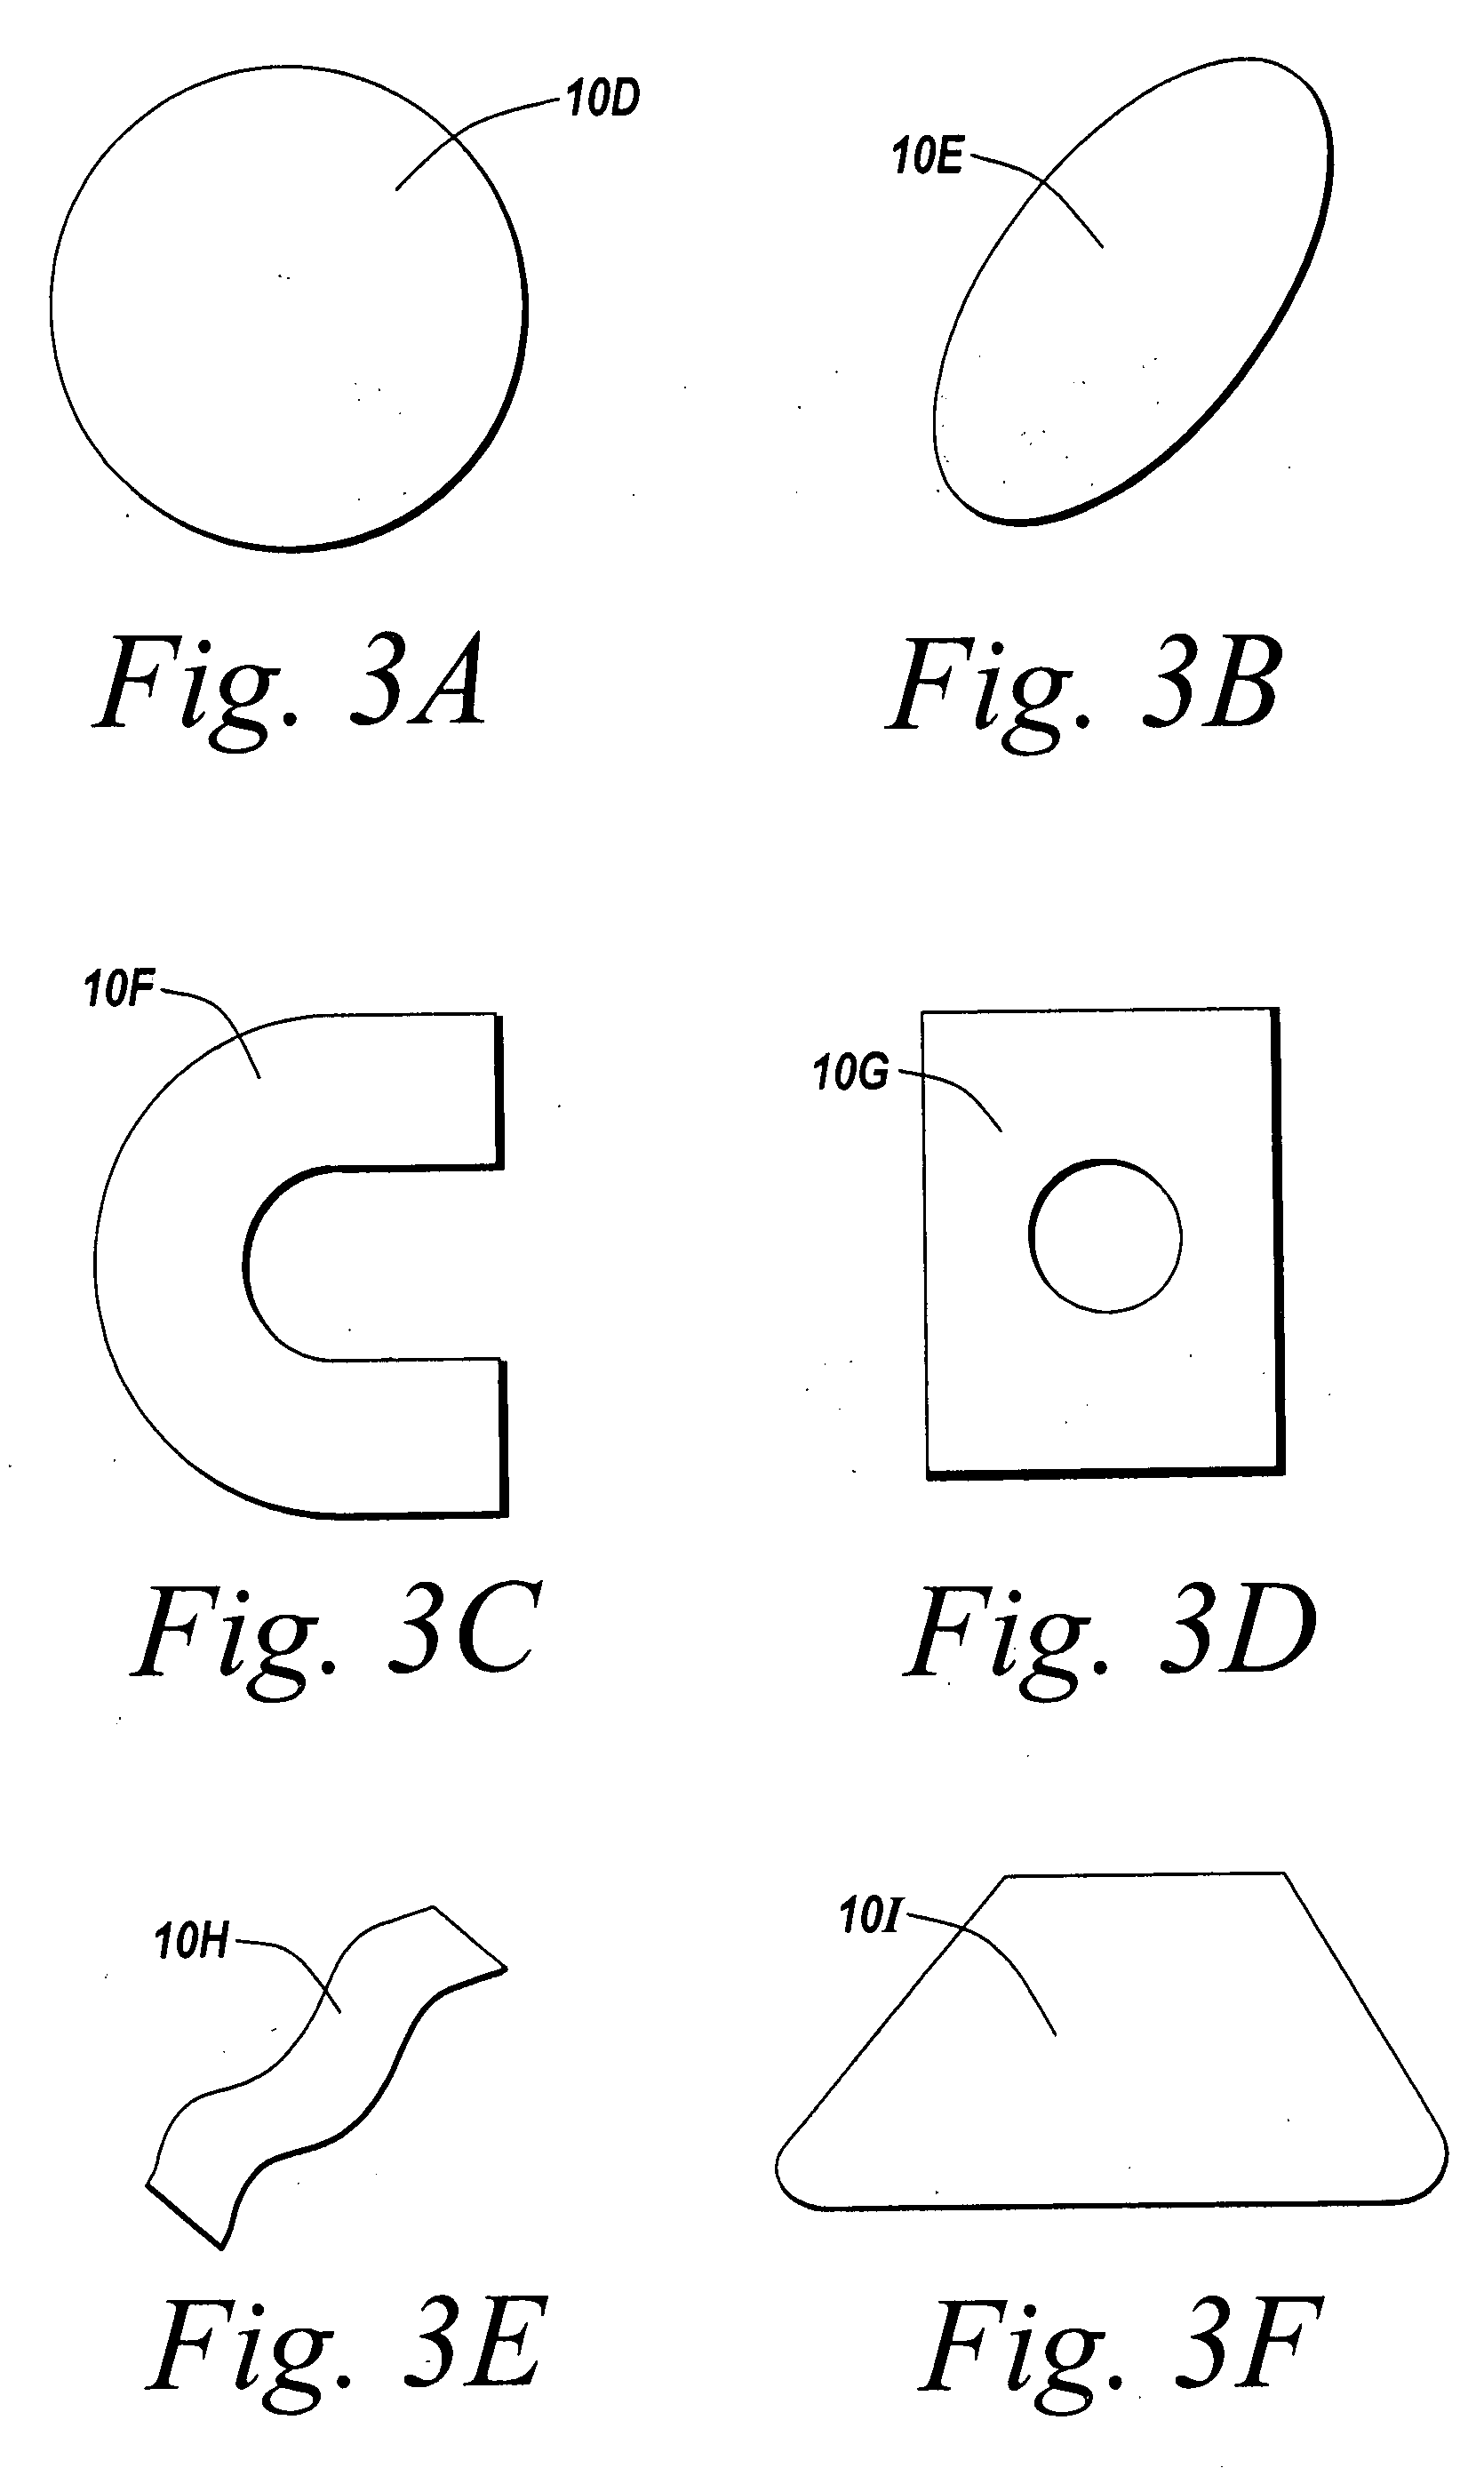 Barrier layer with underlying medical device and one or more reinforcing support structures